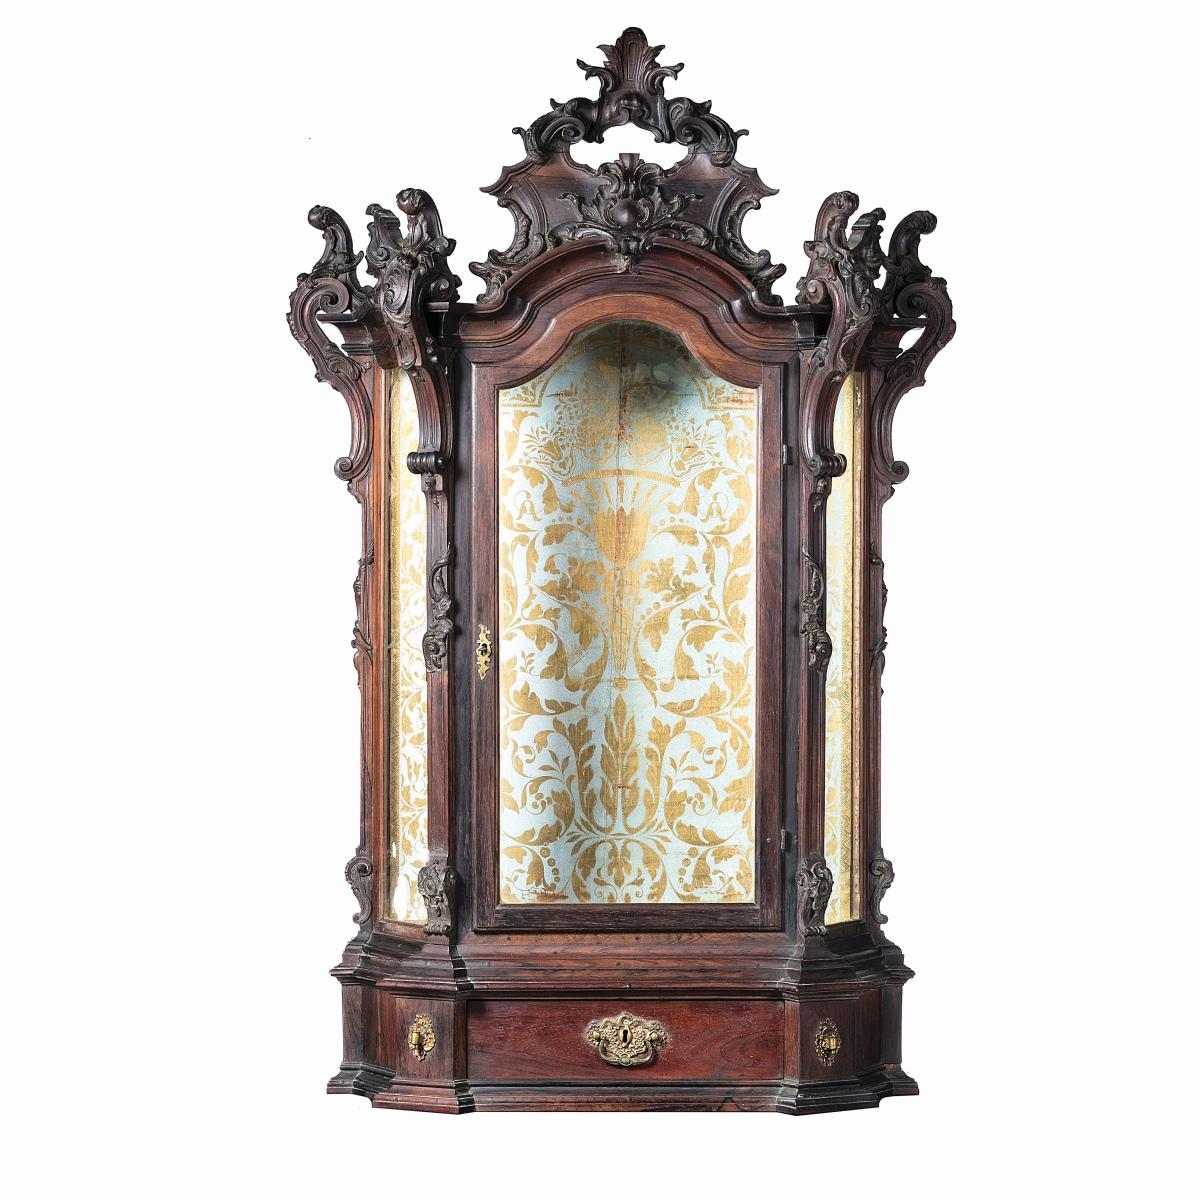 Hand-Crafted Portuguese Oratory 18th Century Palisander Wood For Sale